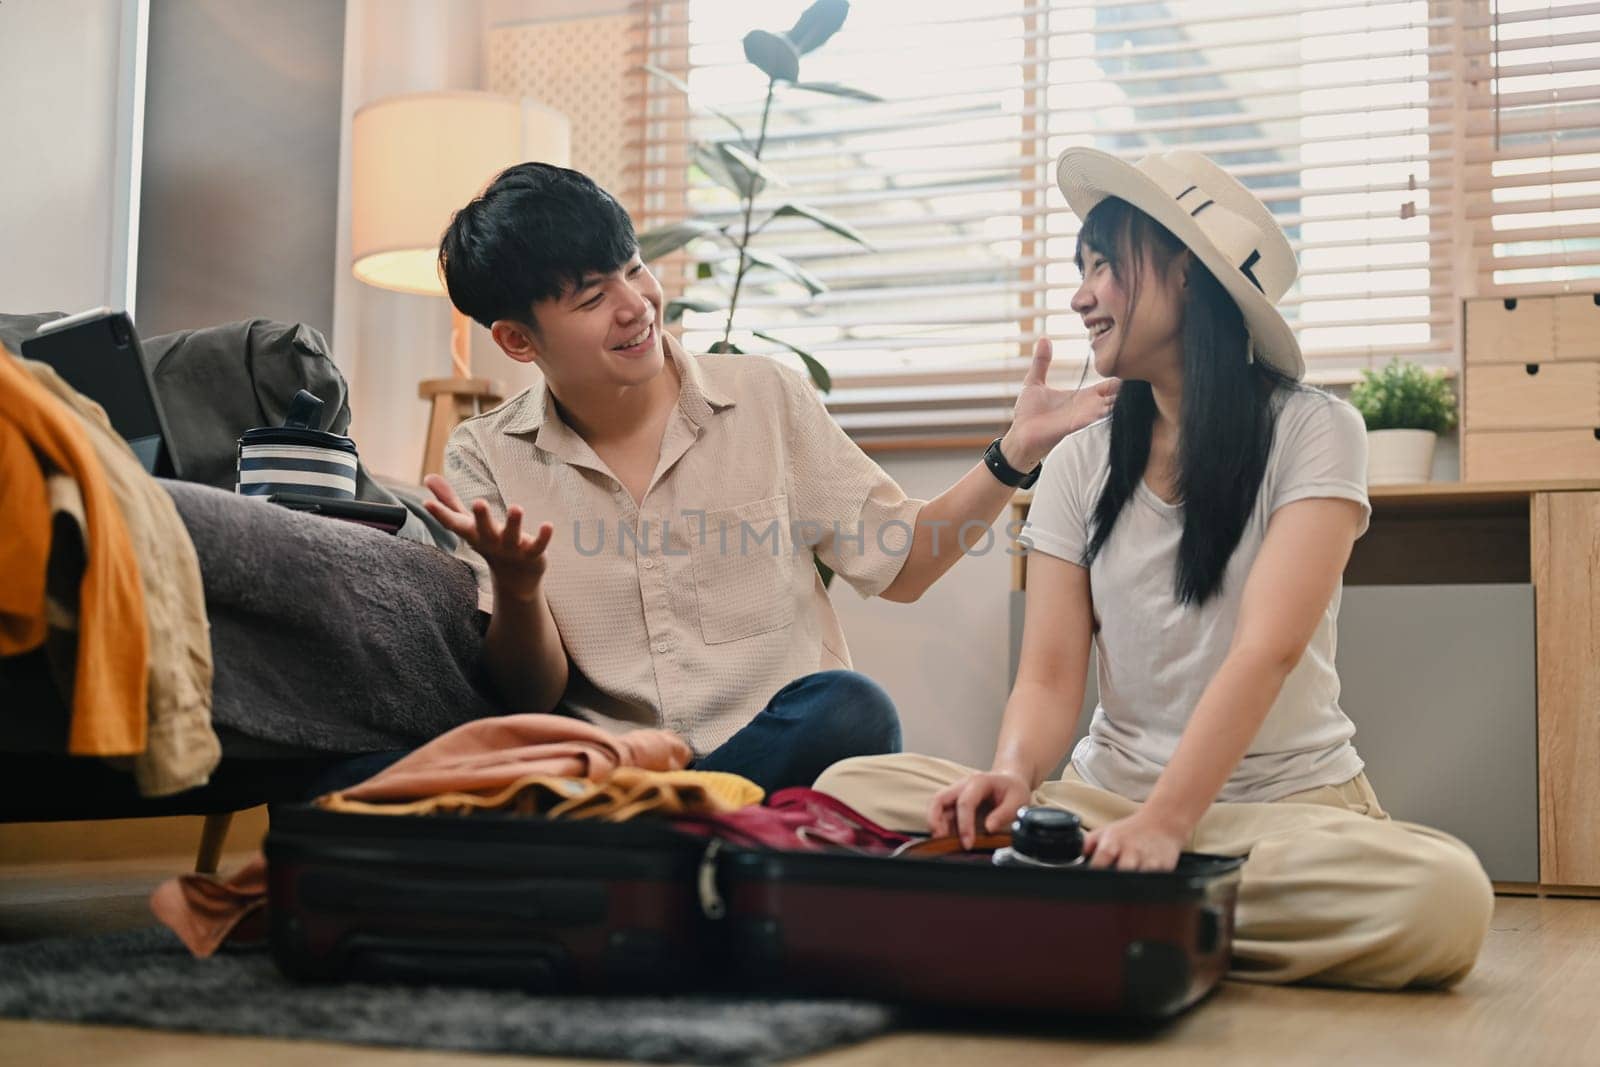 Cheerful young couple packing clothes in the suitcase, preparing for vacation trip in living room.